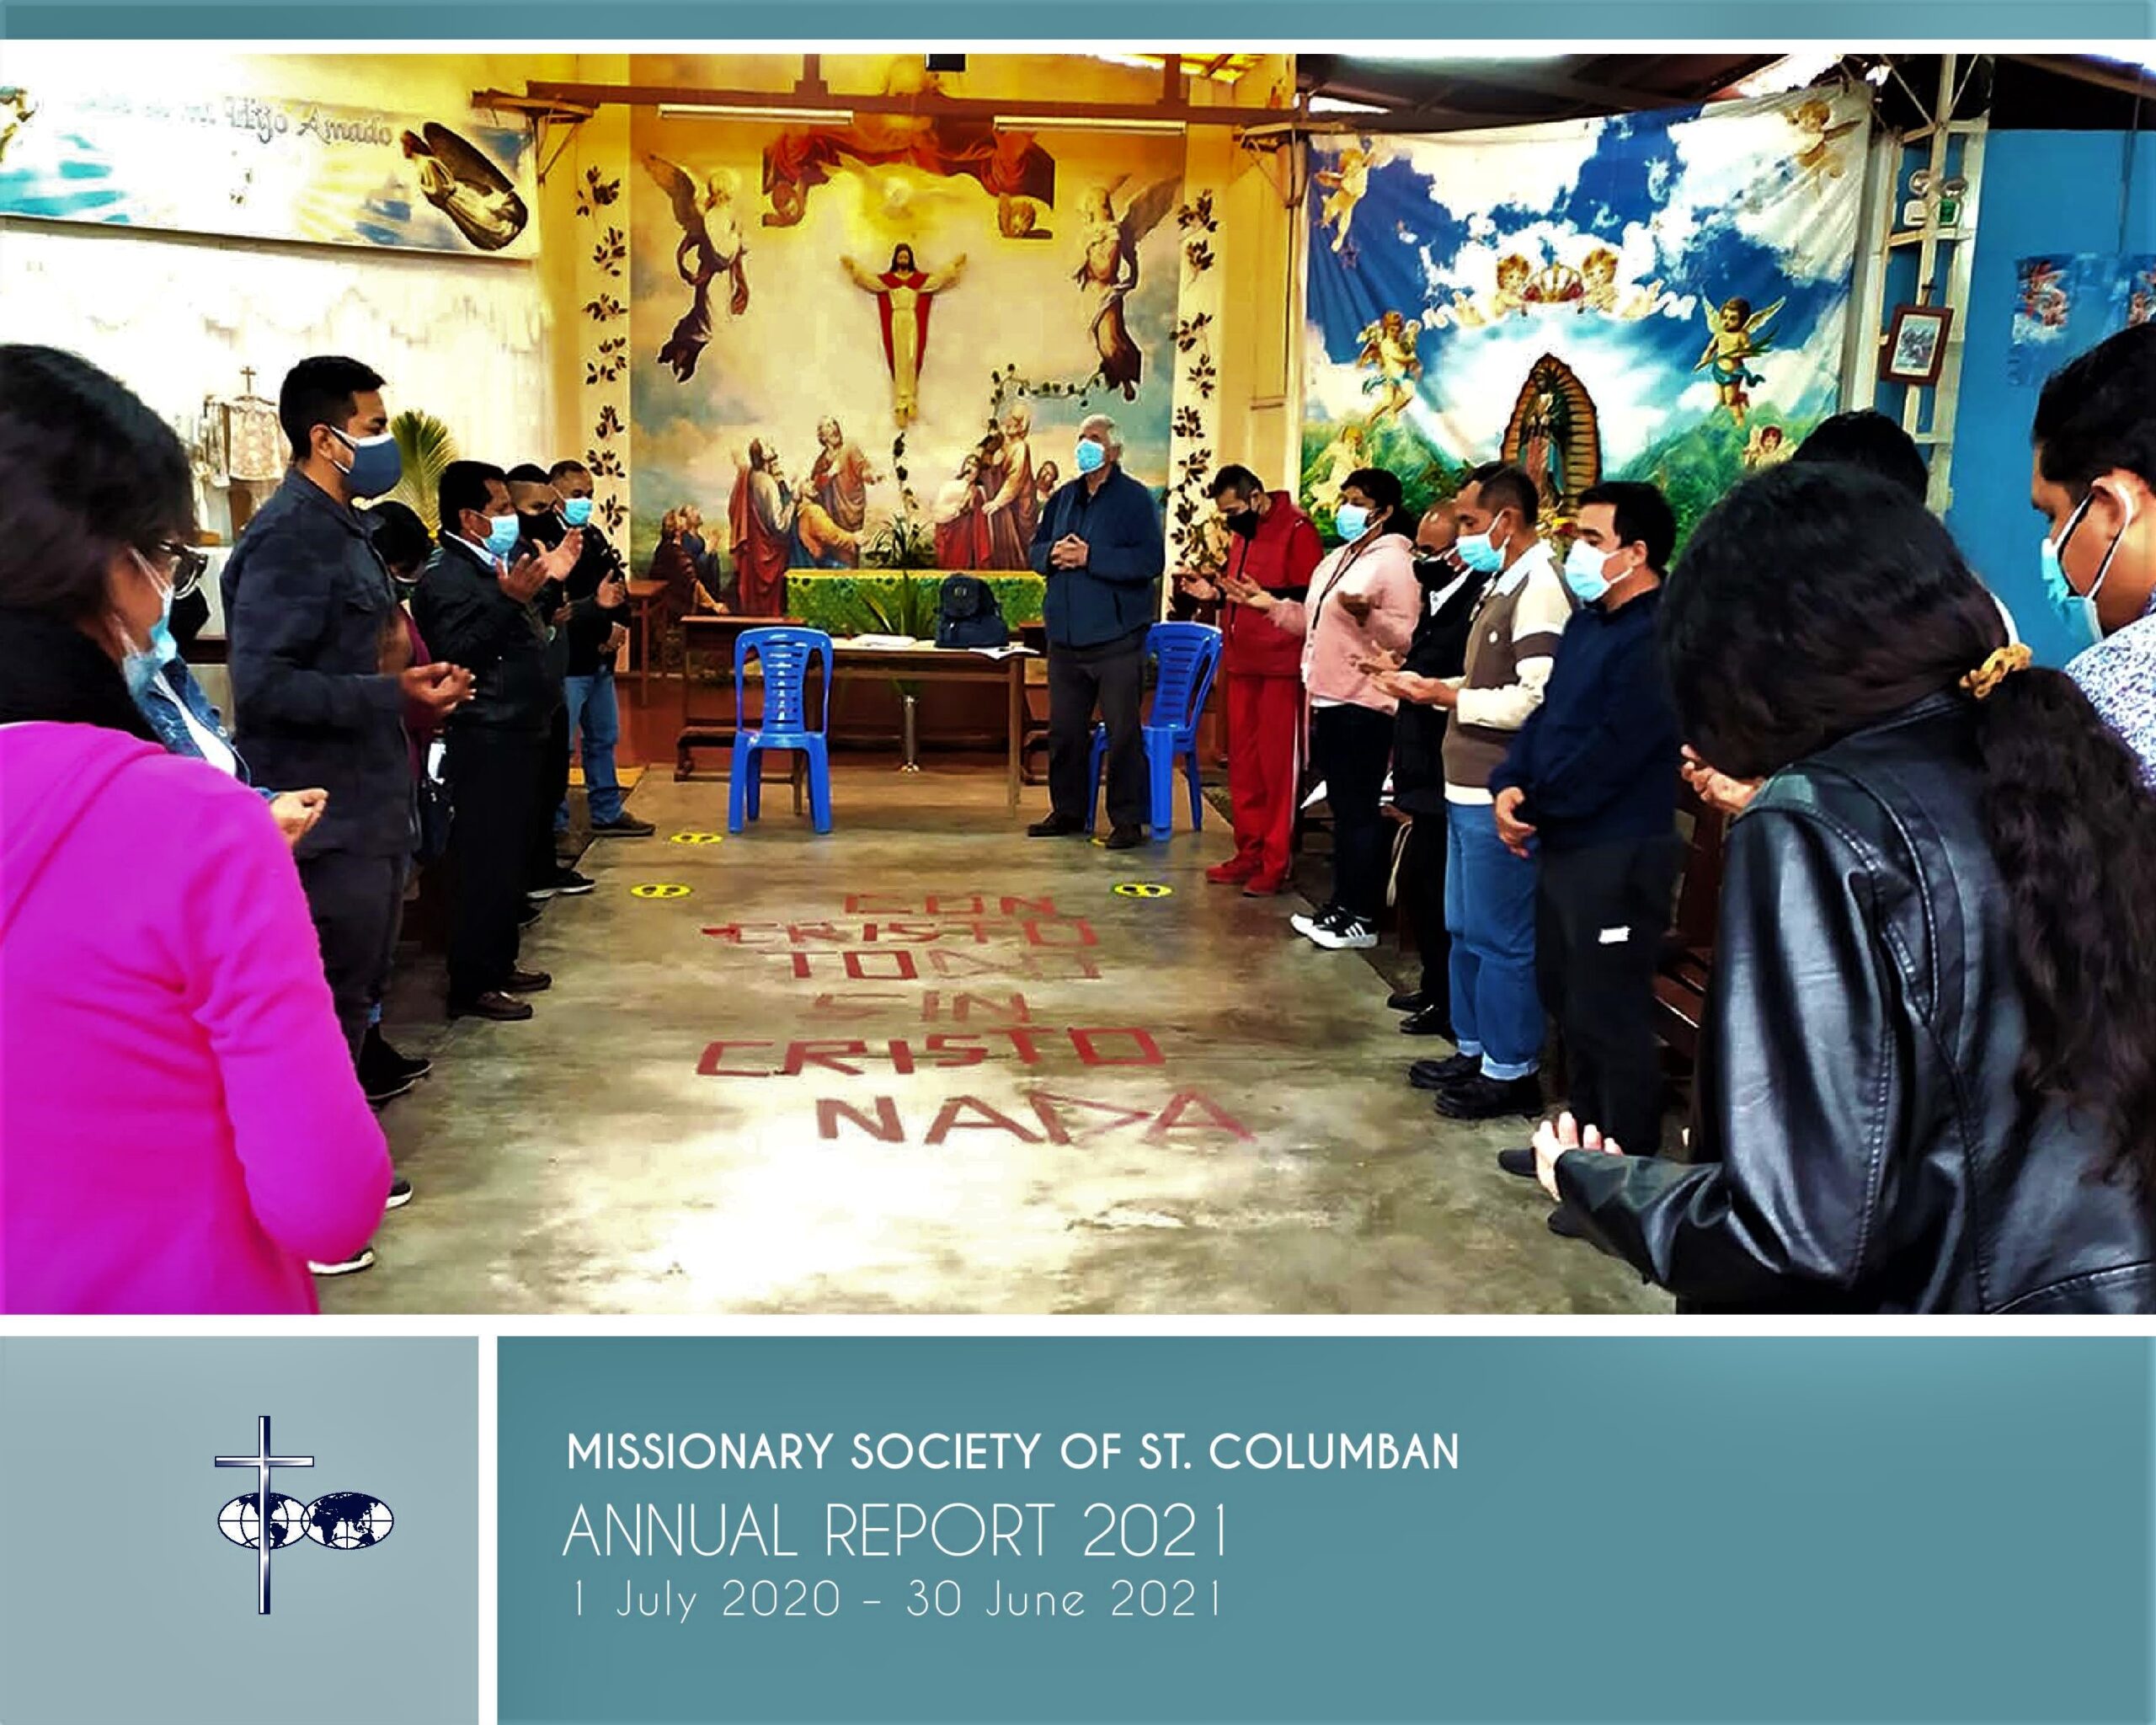 Missionary Society of St Columban Annual Report 2021